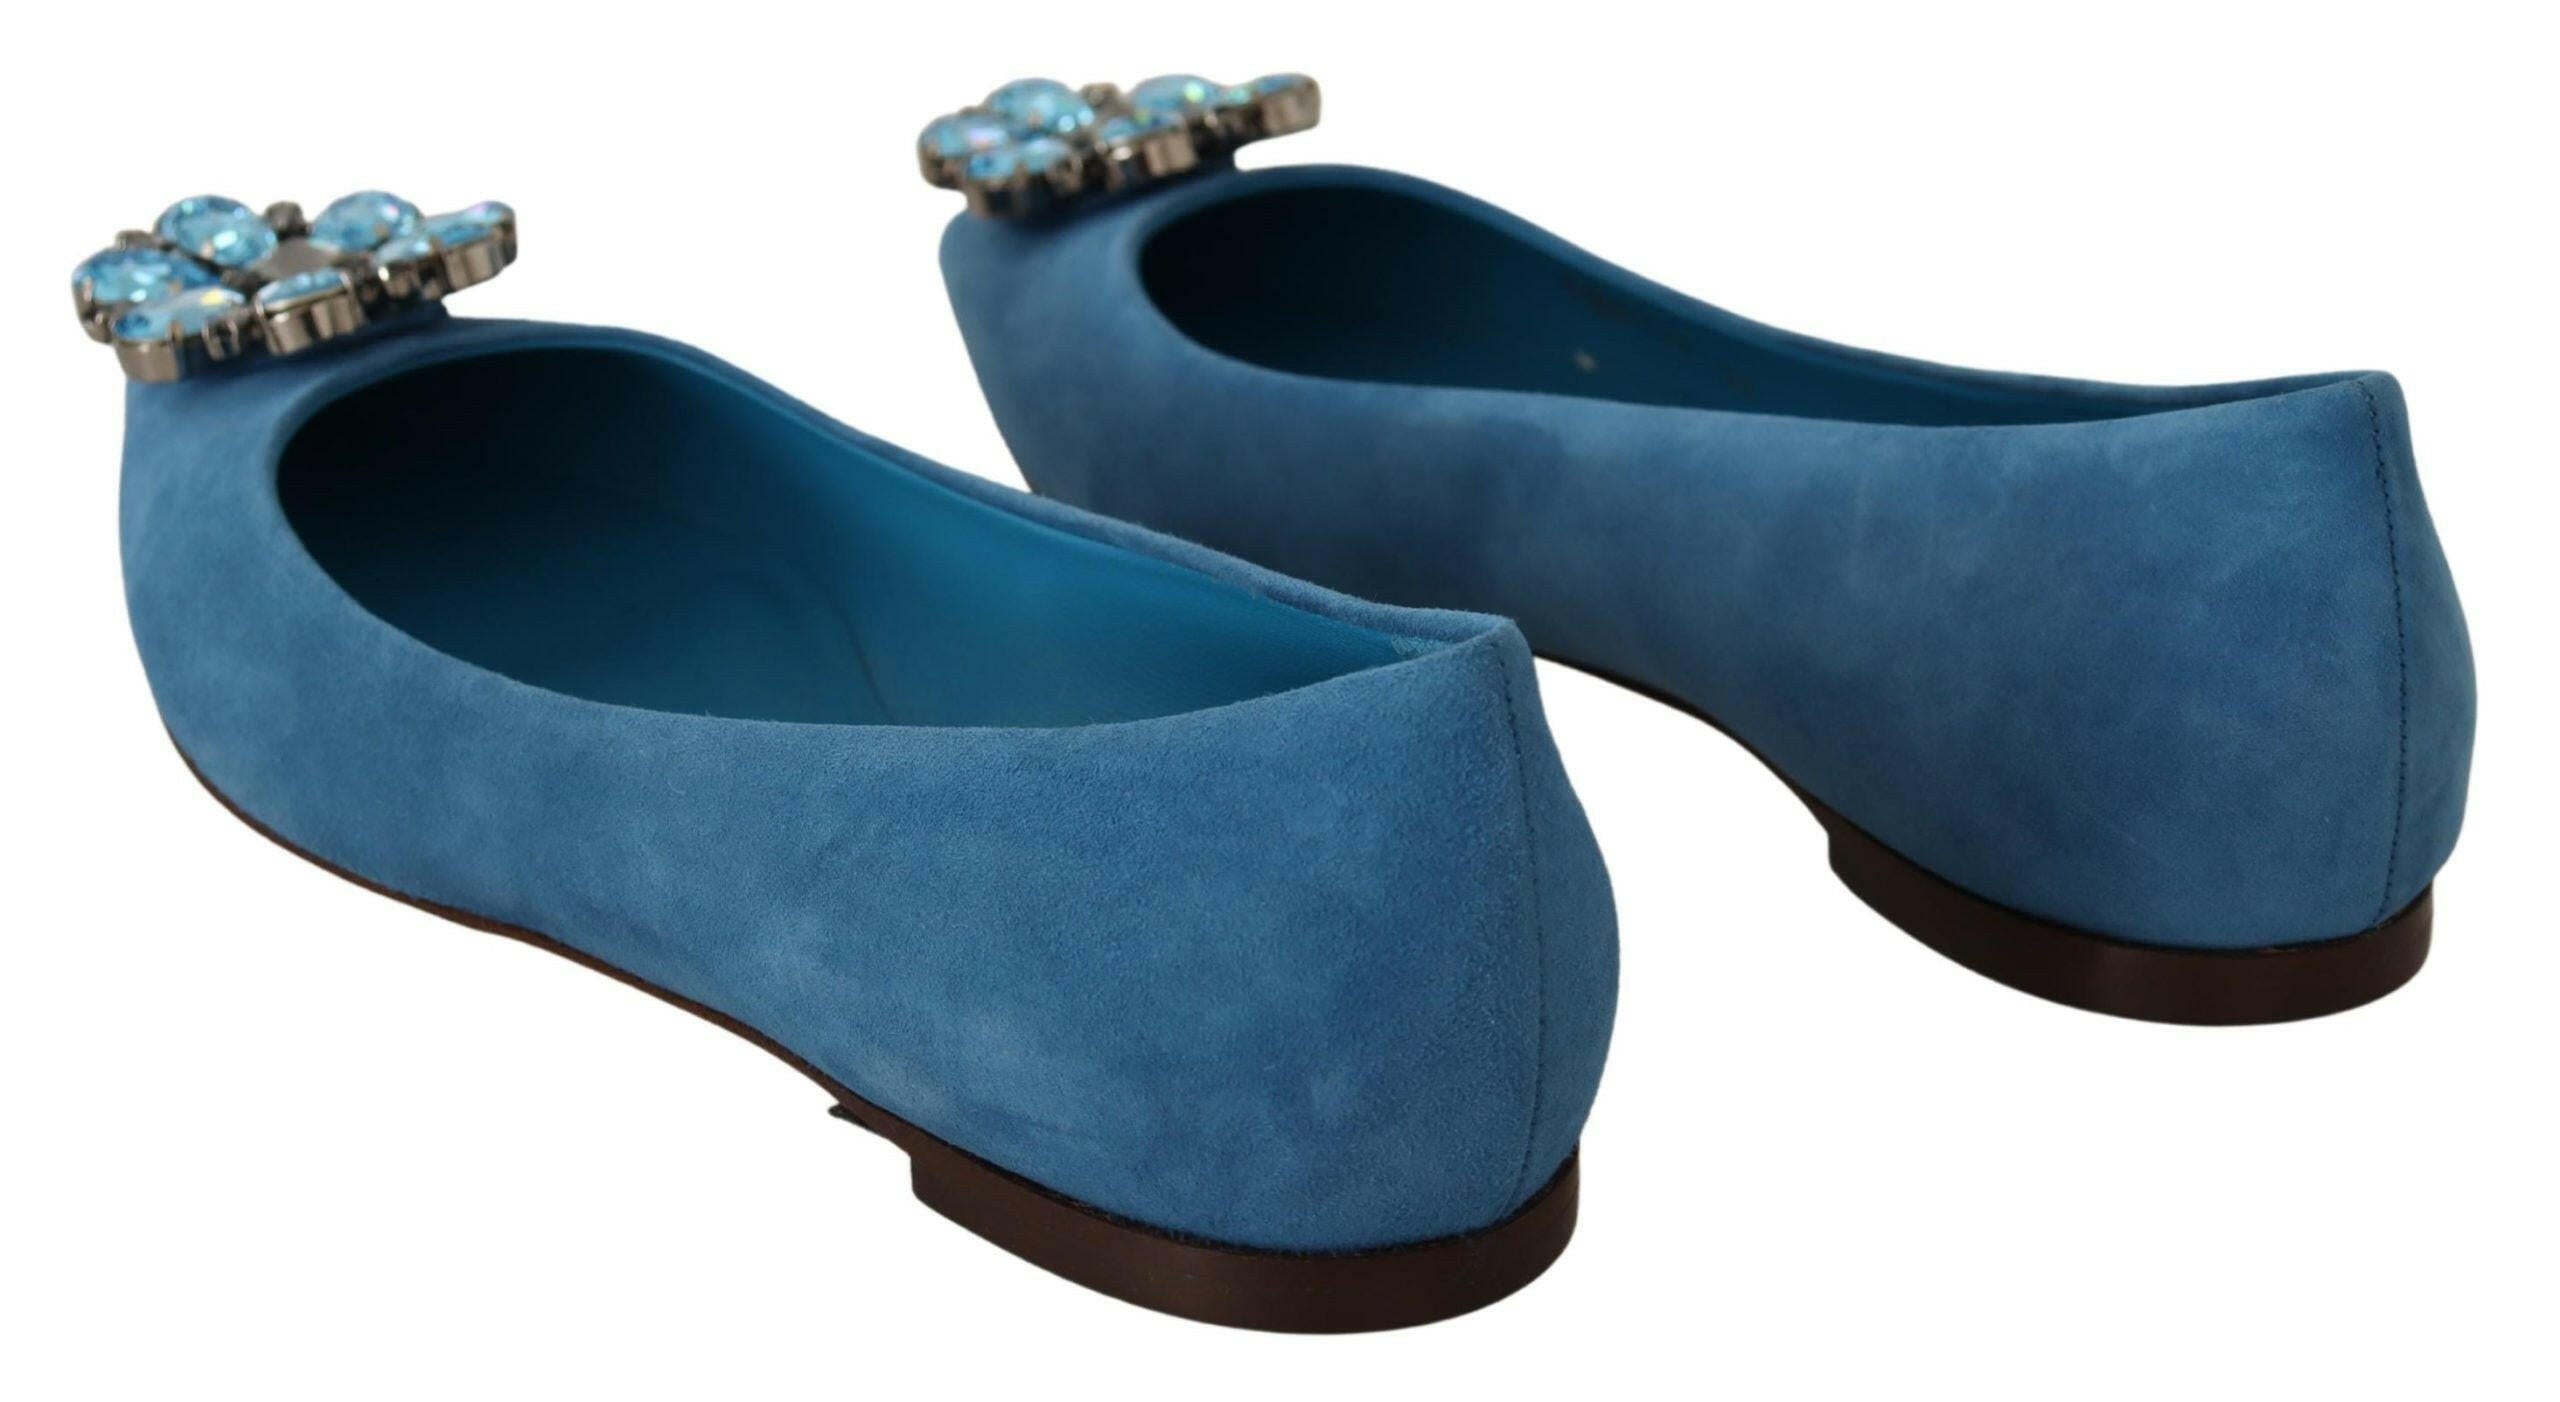 Dolce & Gabbana Blue Suede Crystals Loafers Flats Shoes - GENUINE AUTHENTIC BRAND LLC  